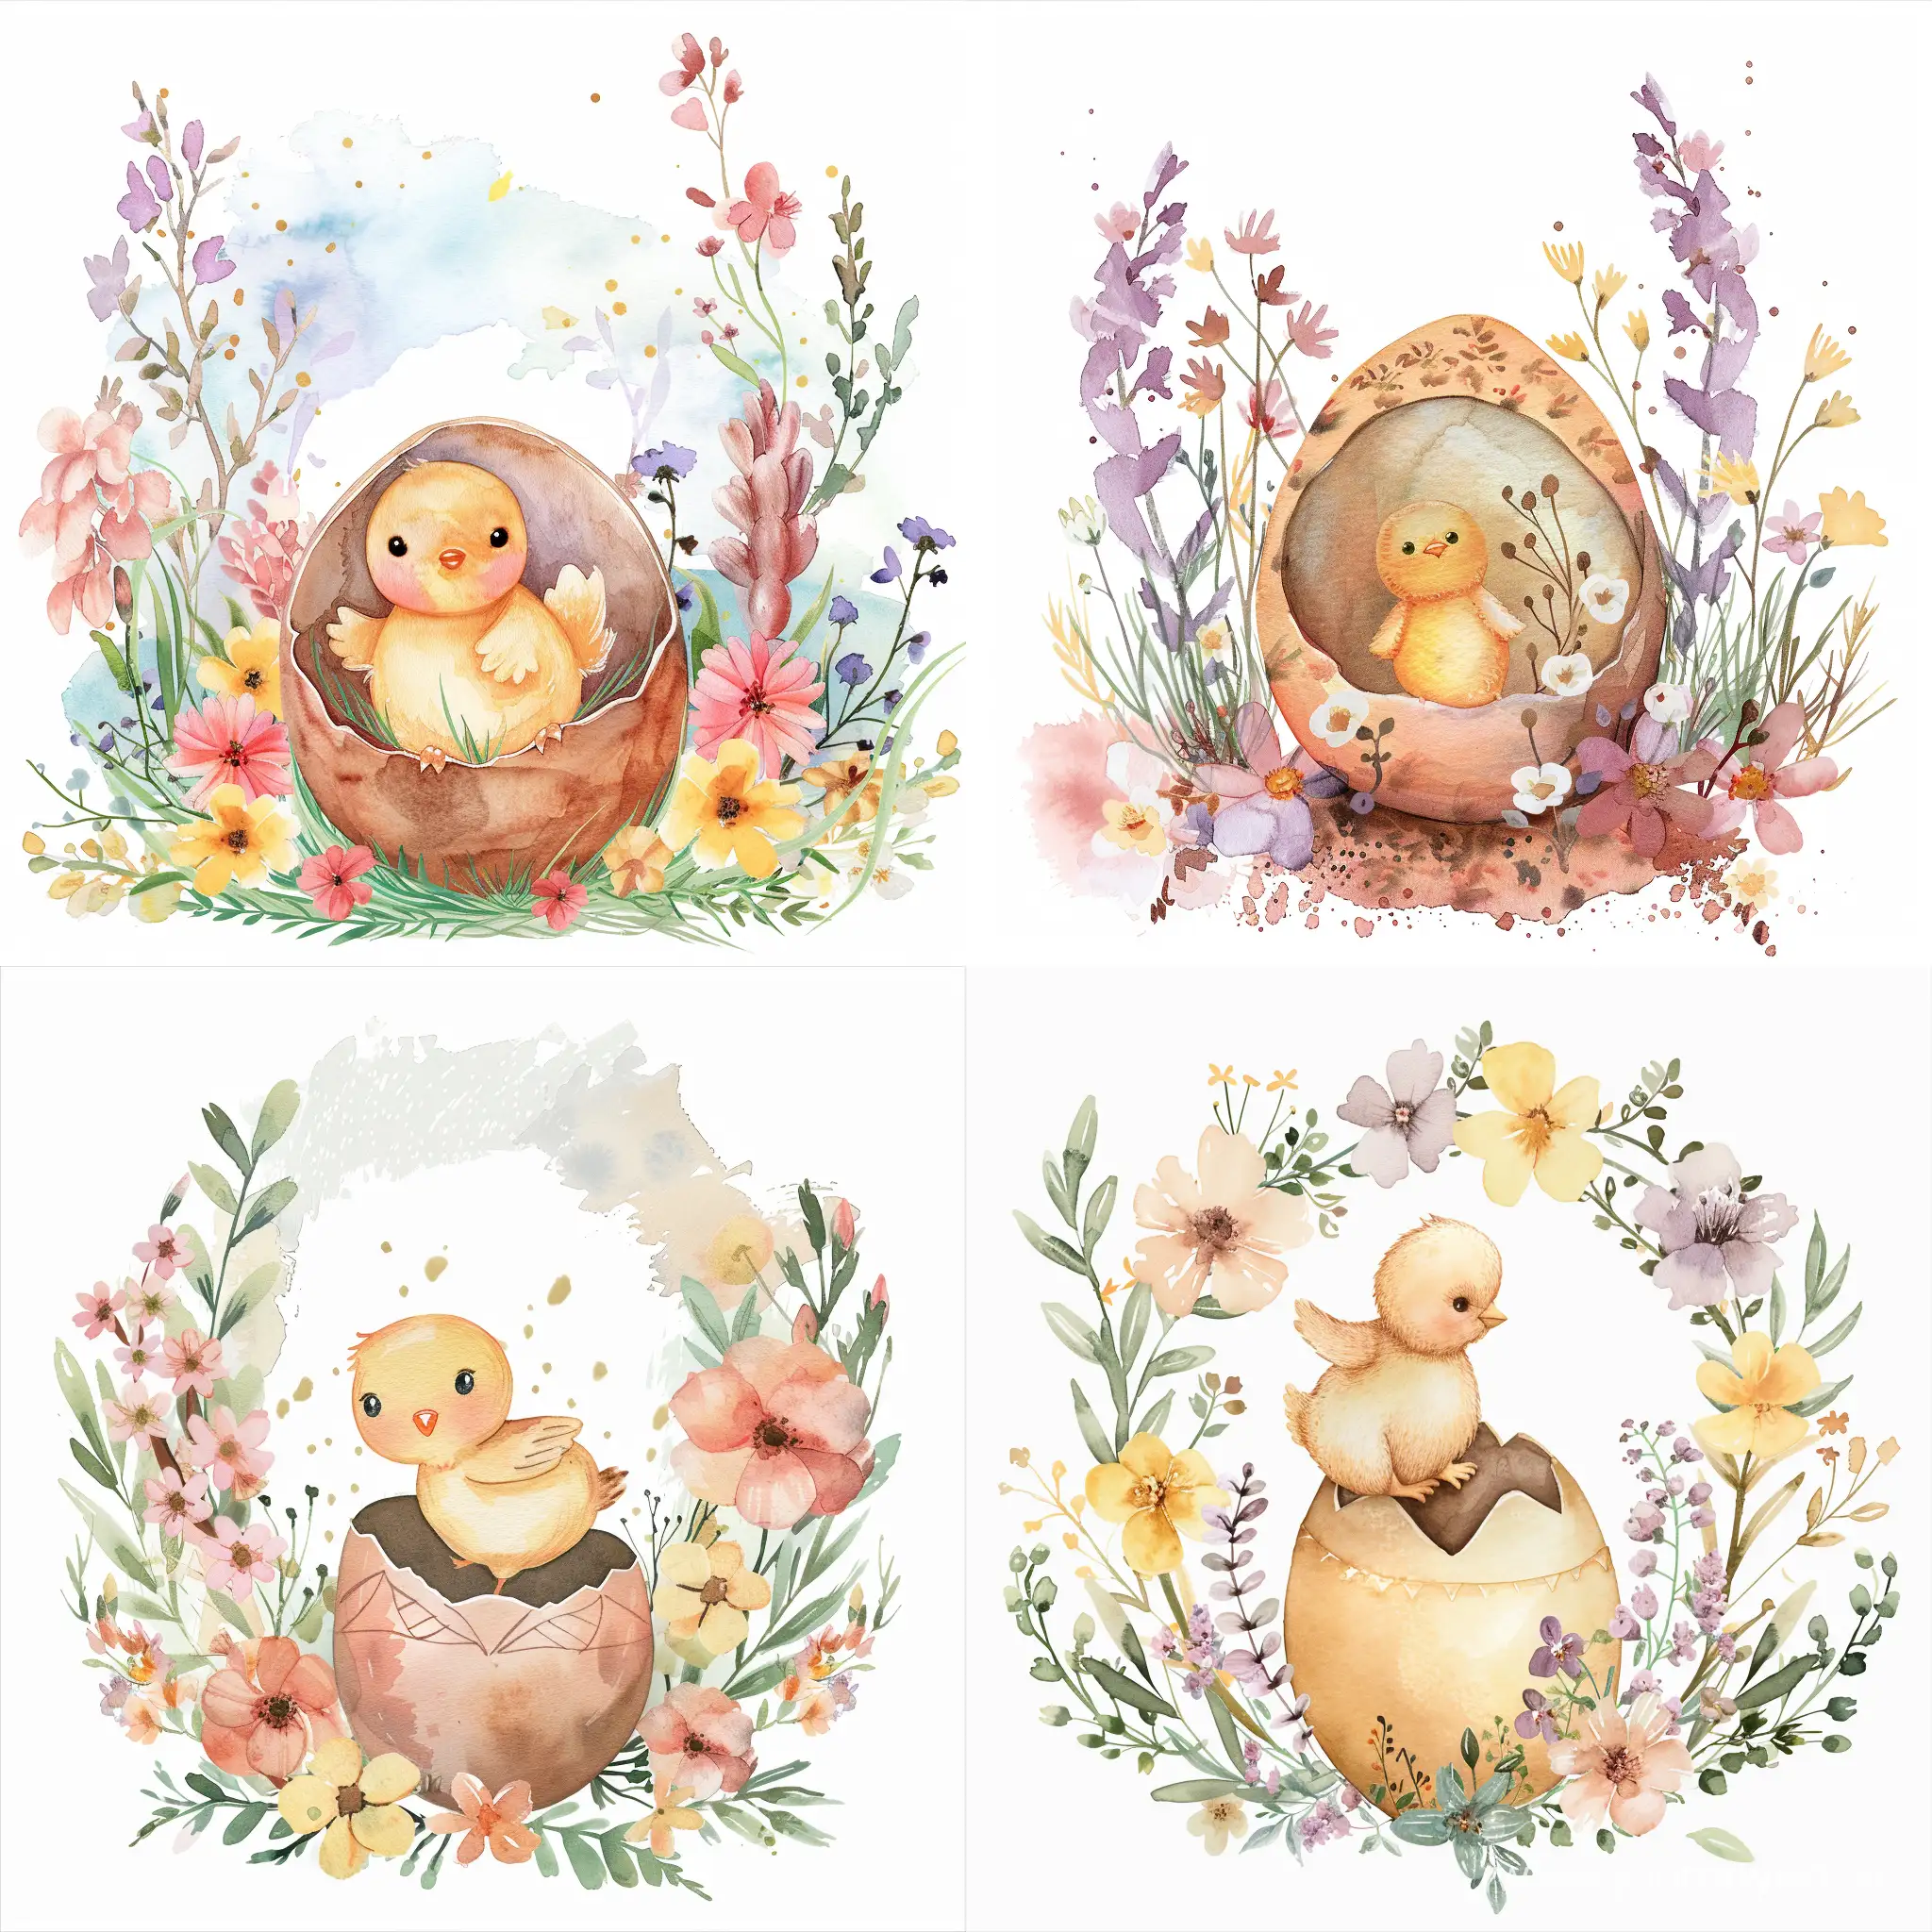 Adorable-Easter-Chick-in-Eggshell-Surrounded-by-Pastel-Flowers